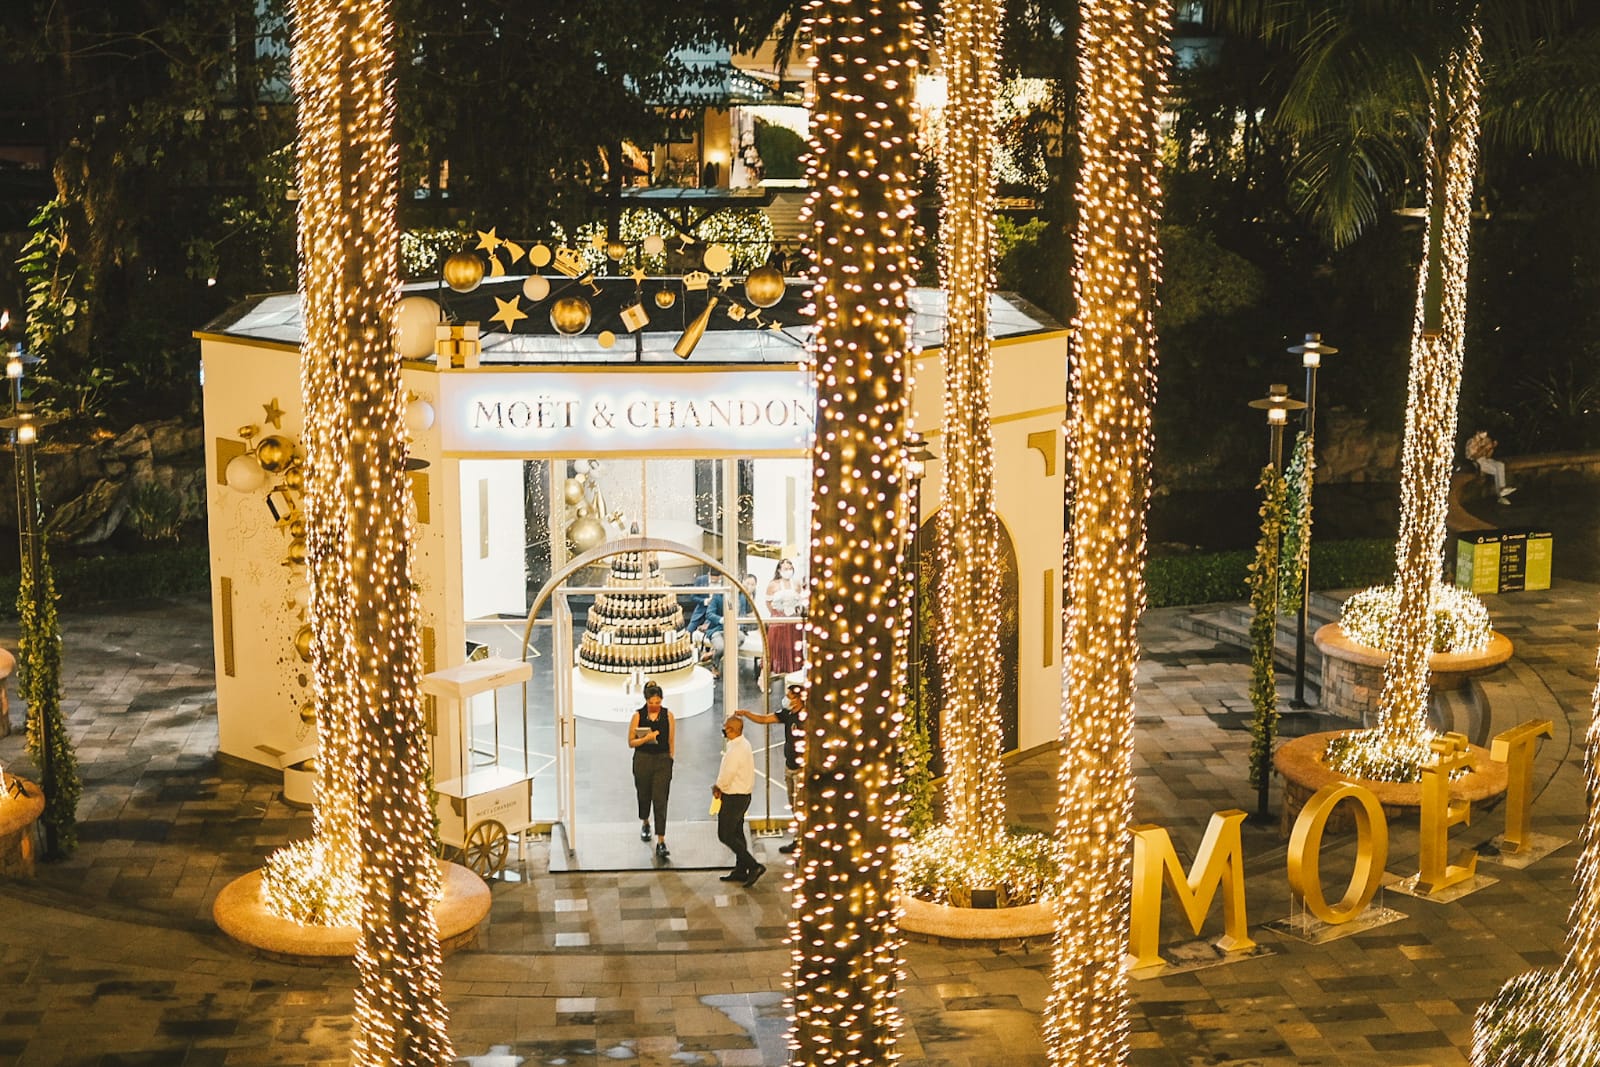 Pop goes the holidays with famed champagne house’s first-ever Manila pop-up store